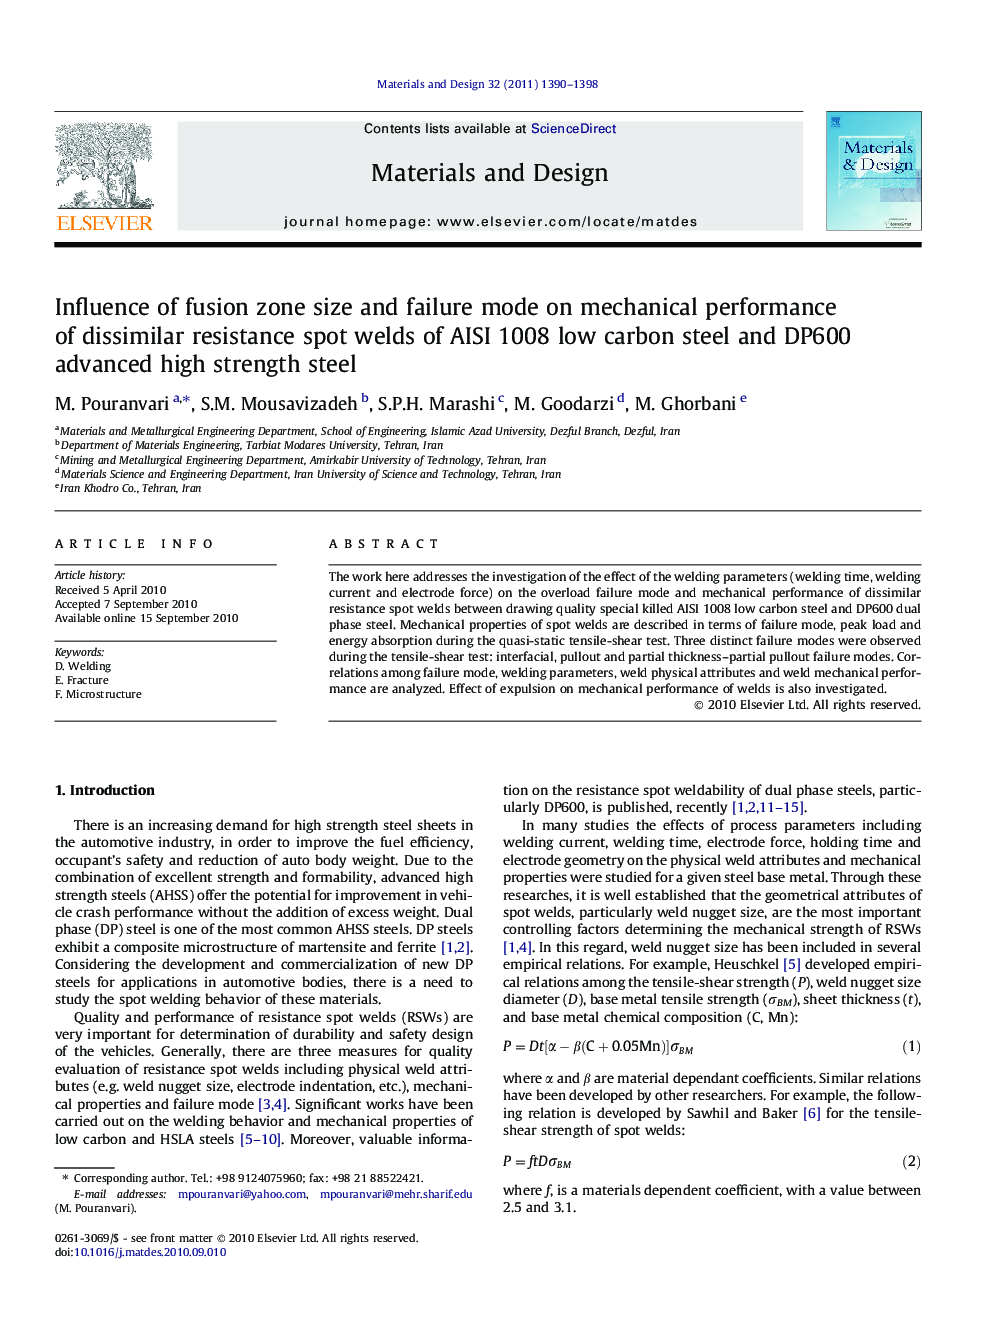 Influence of fusion zone size and failure mode on mechanical performance of dissimilar resistance spot welds of AISI 1008 low carbon steel and DP600 advanced high strength steel